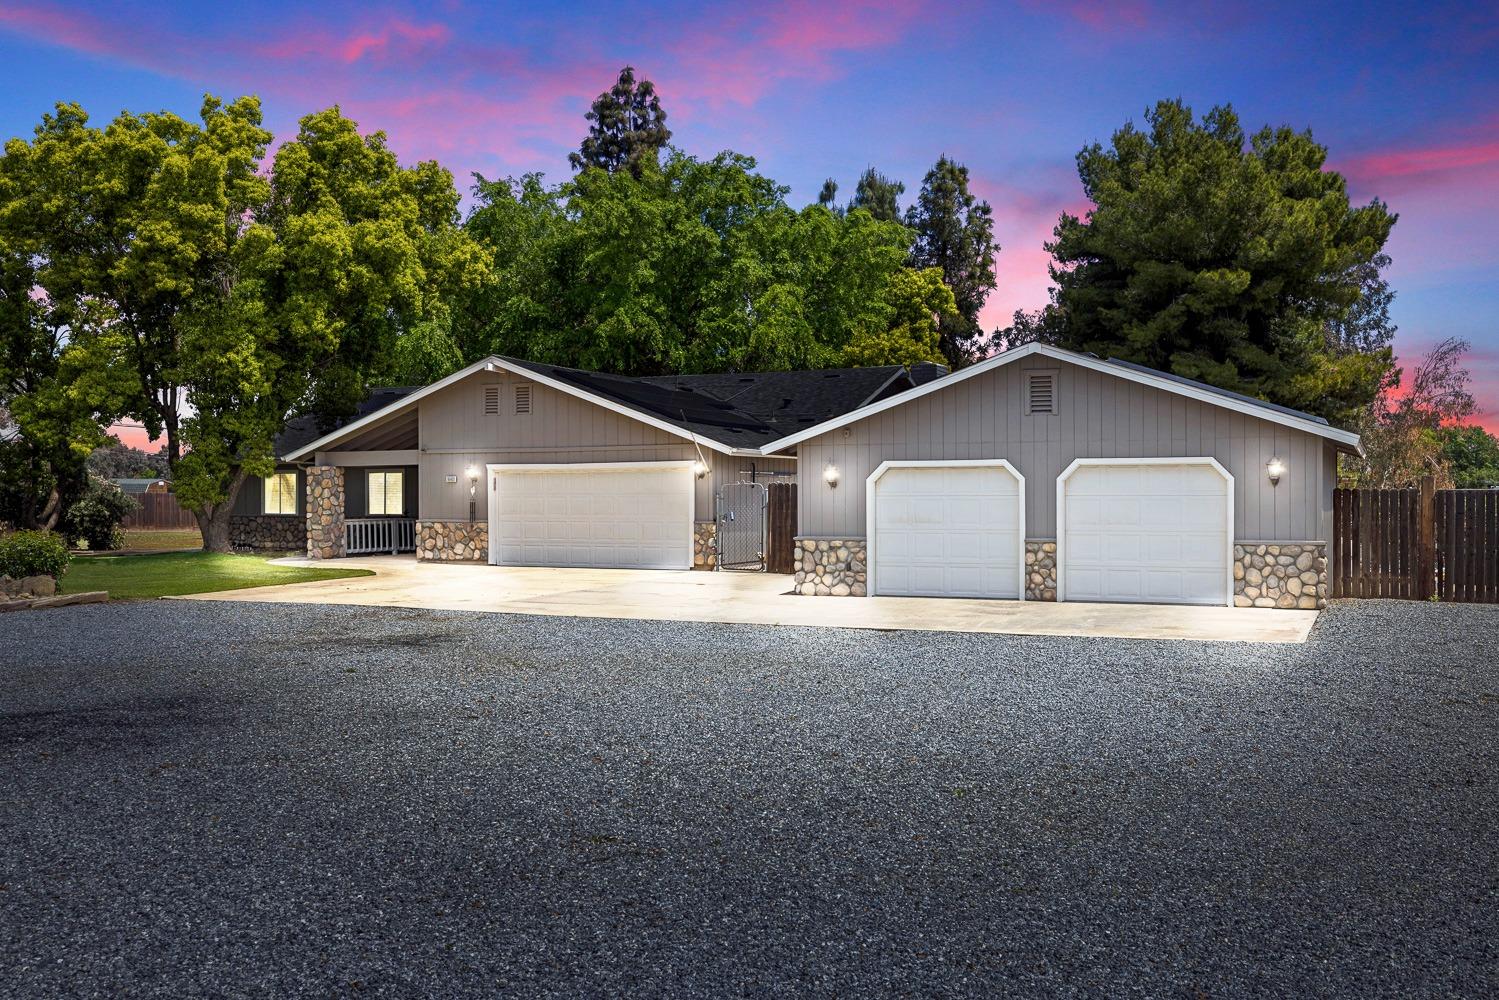 Photo of 16901 Rd 37 in Madera, CA